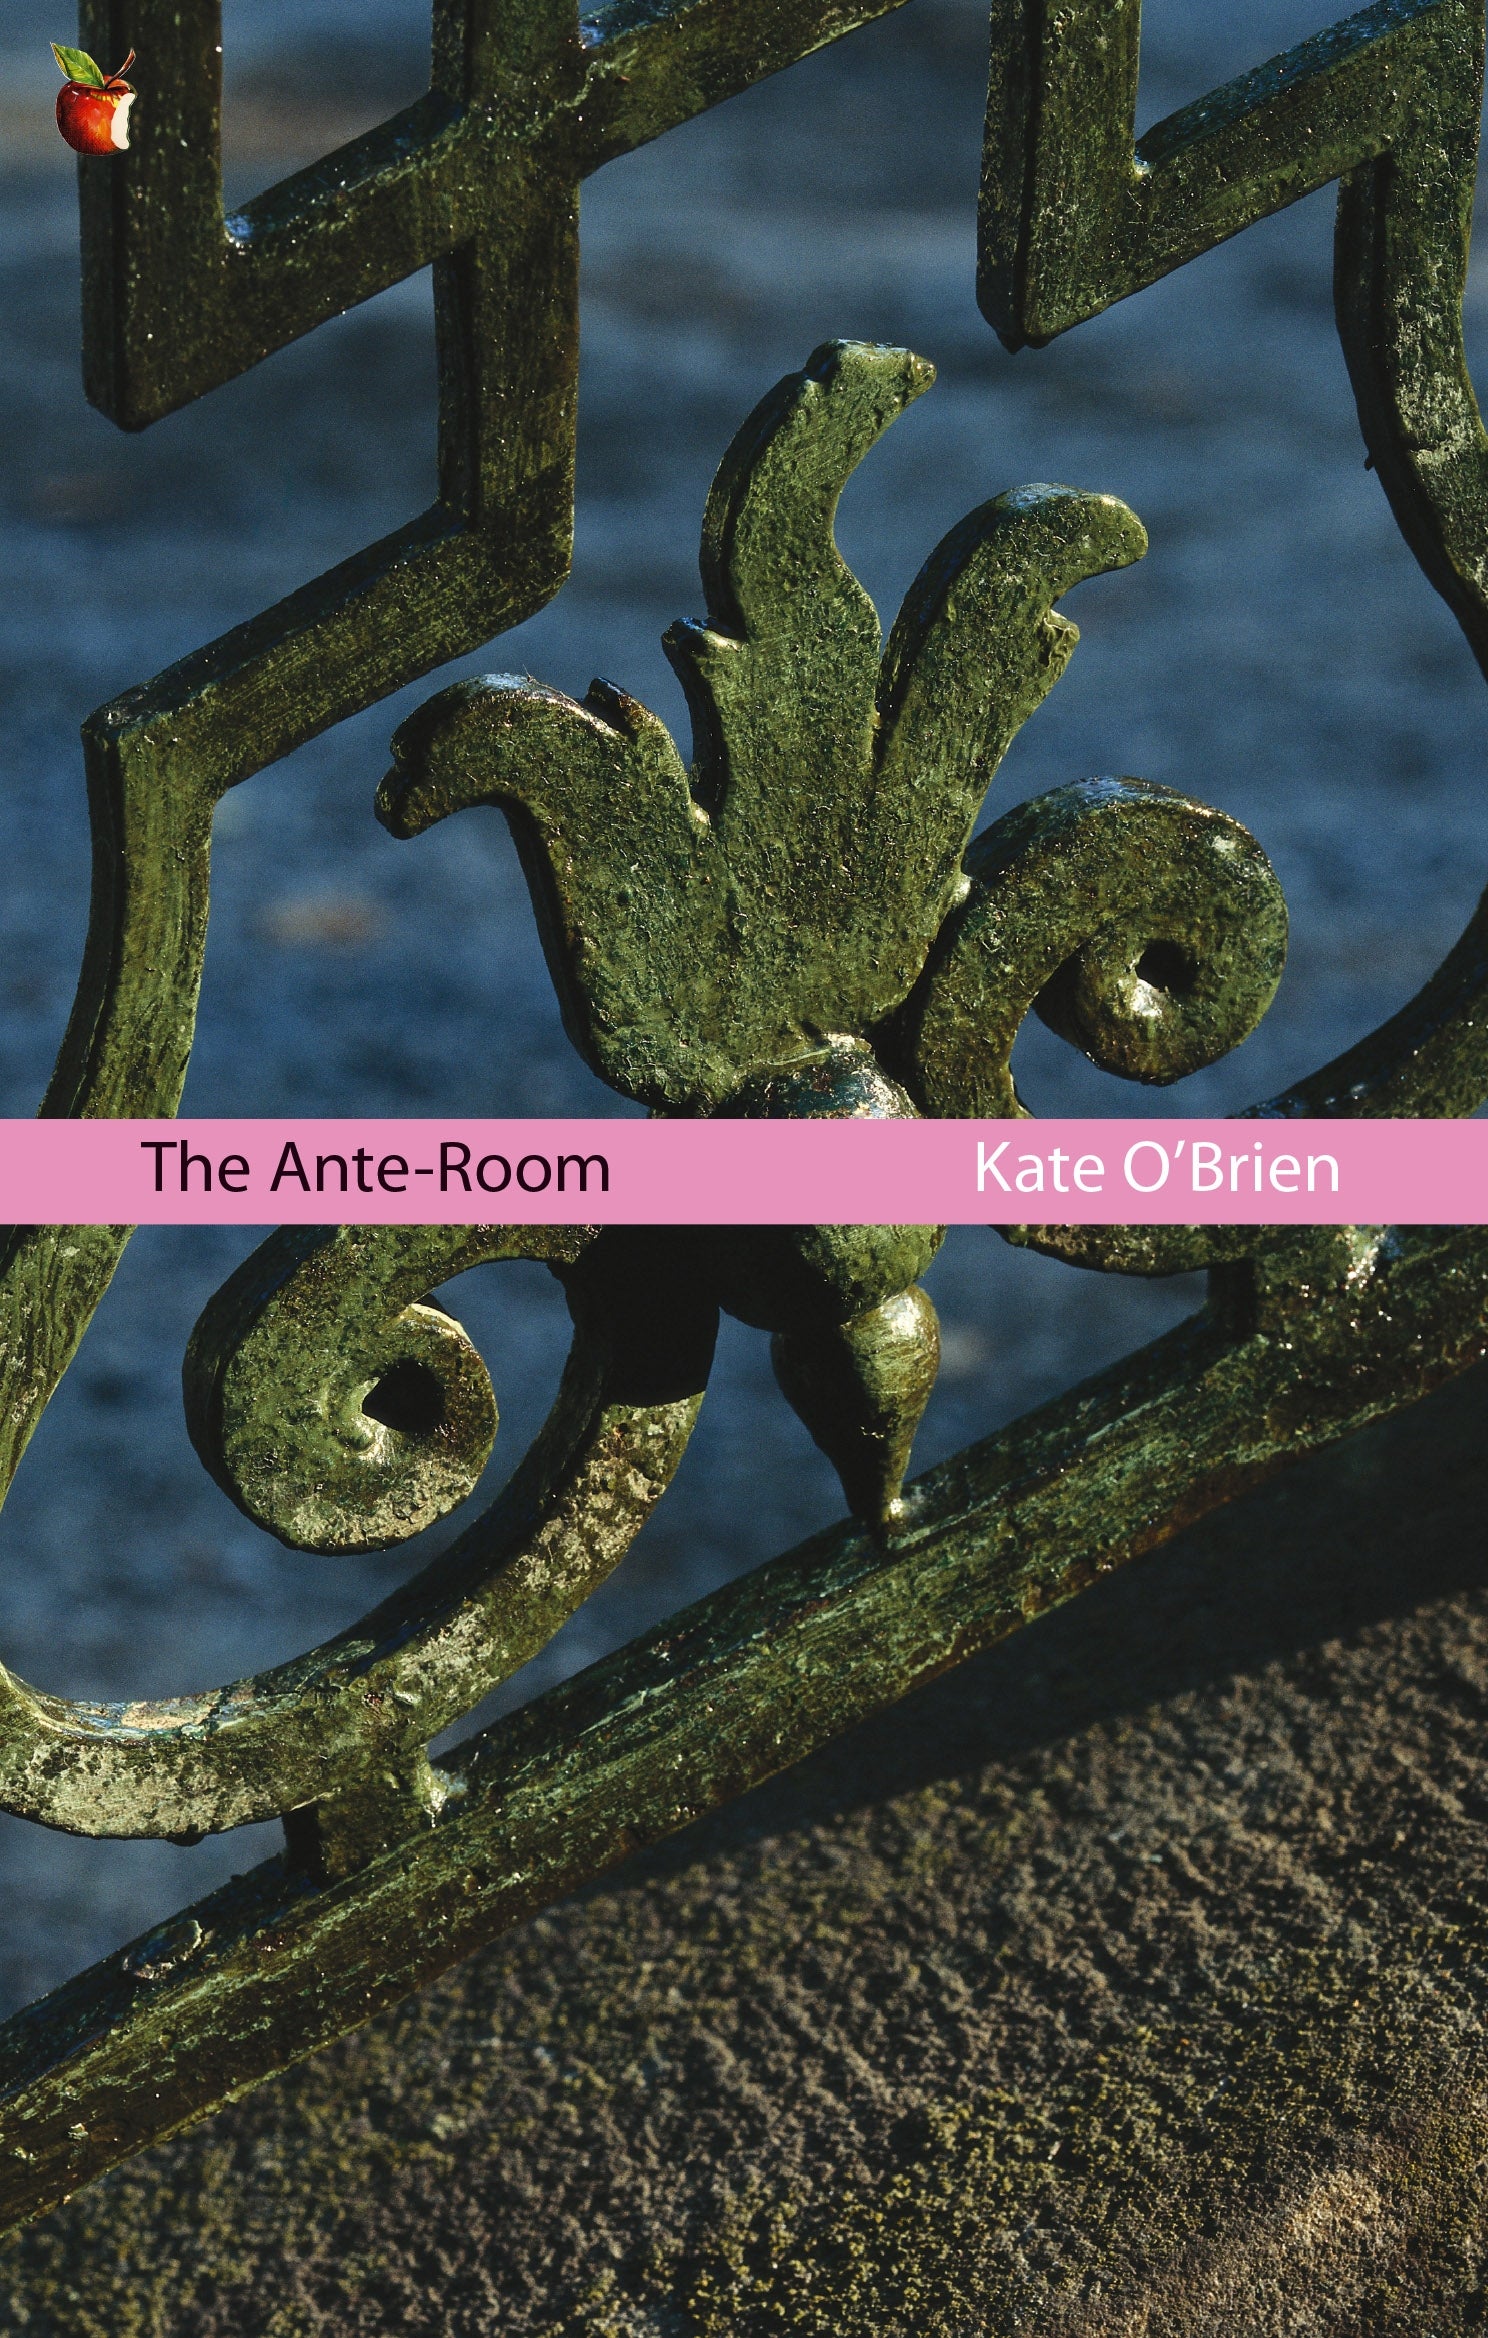 The Ante-Room by Kate O'Brien